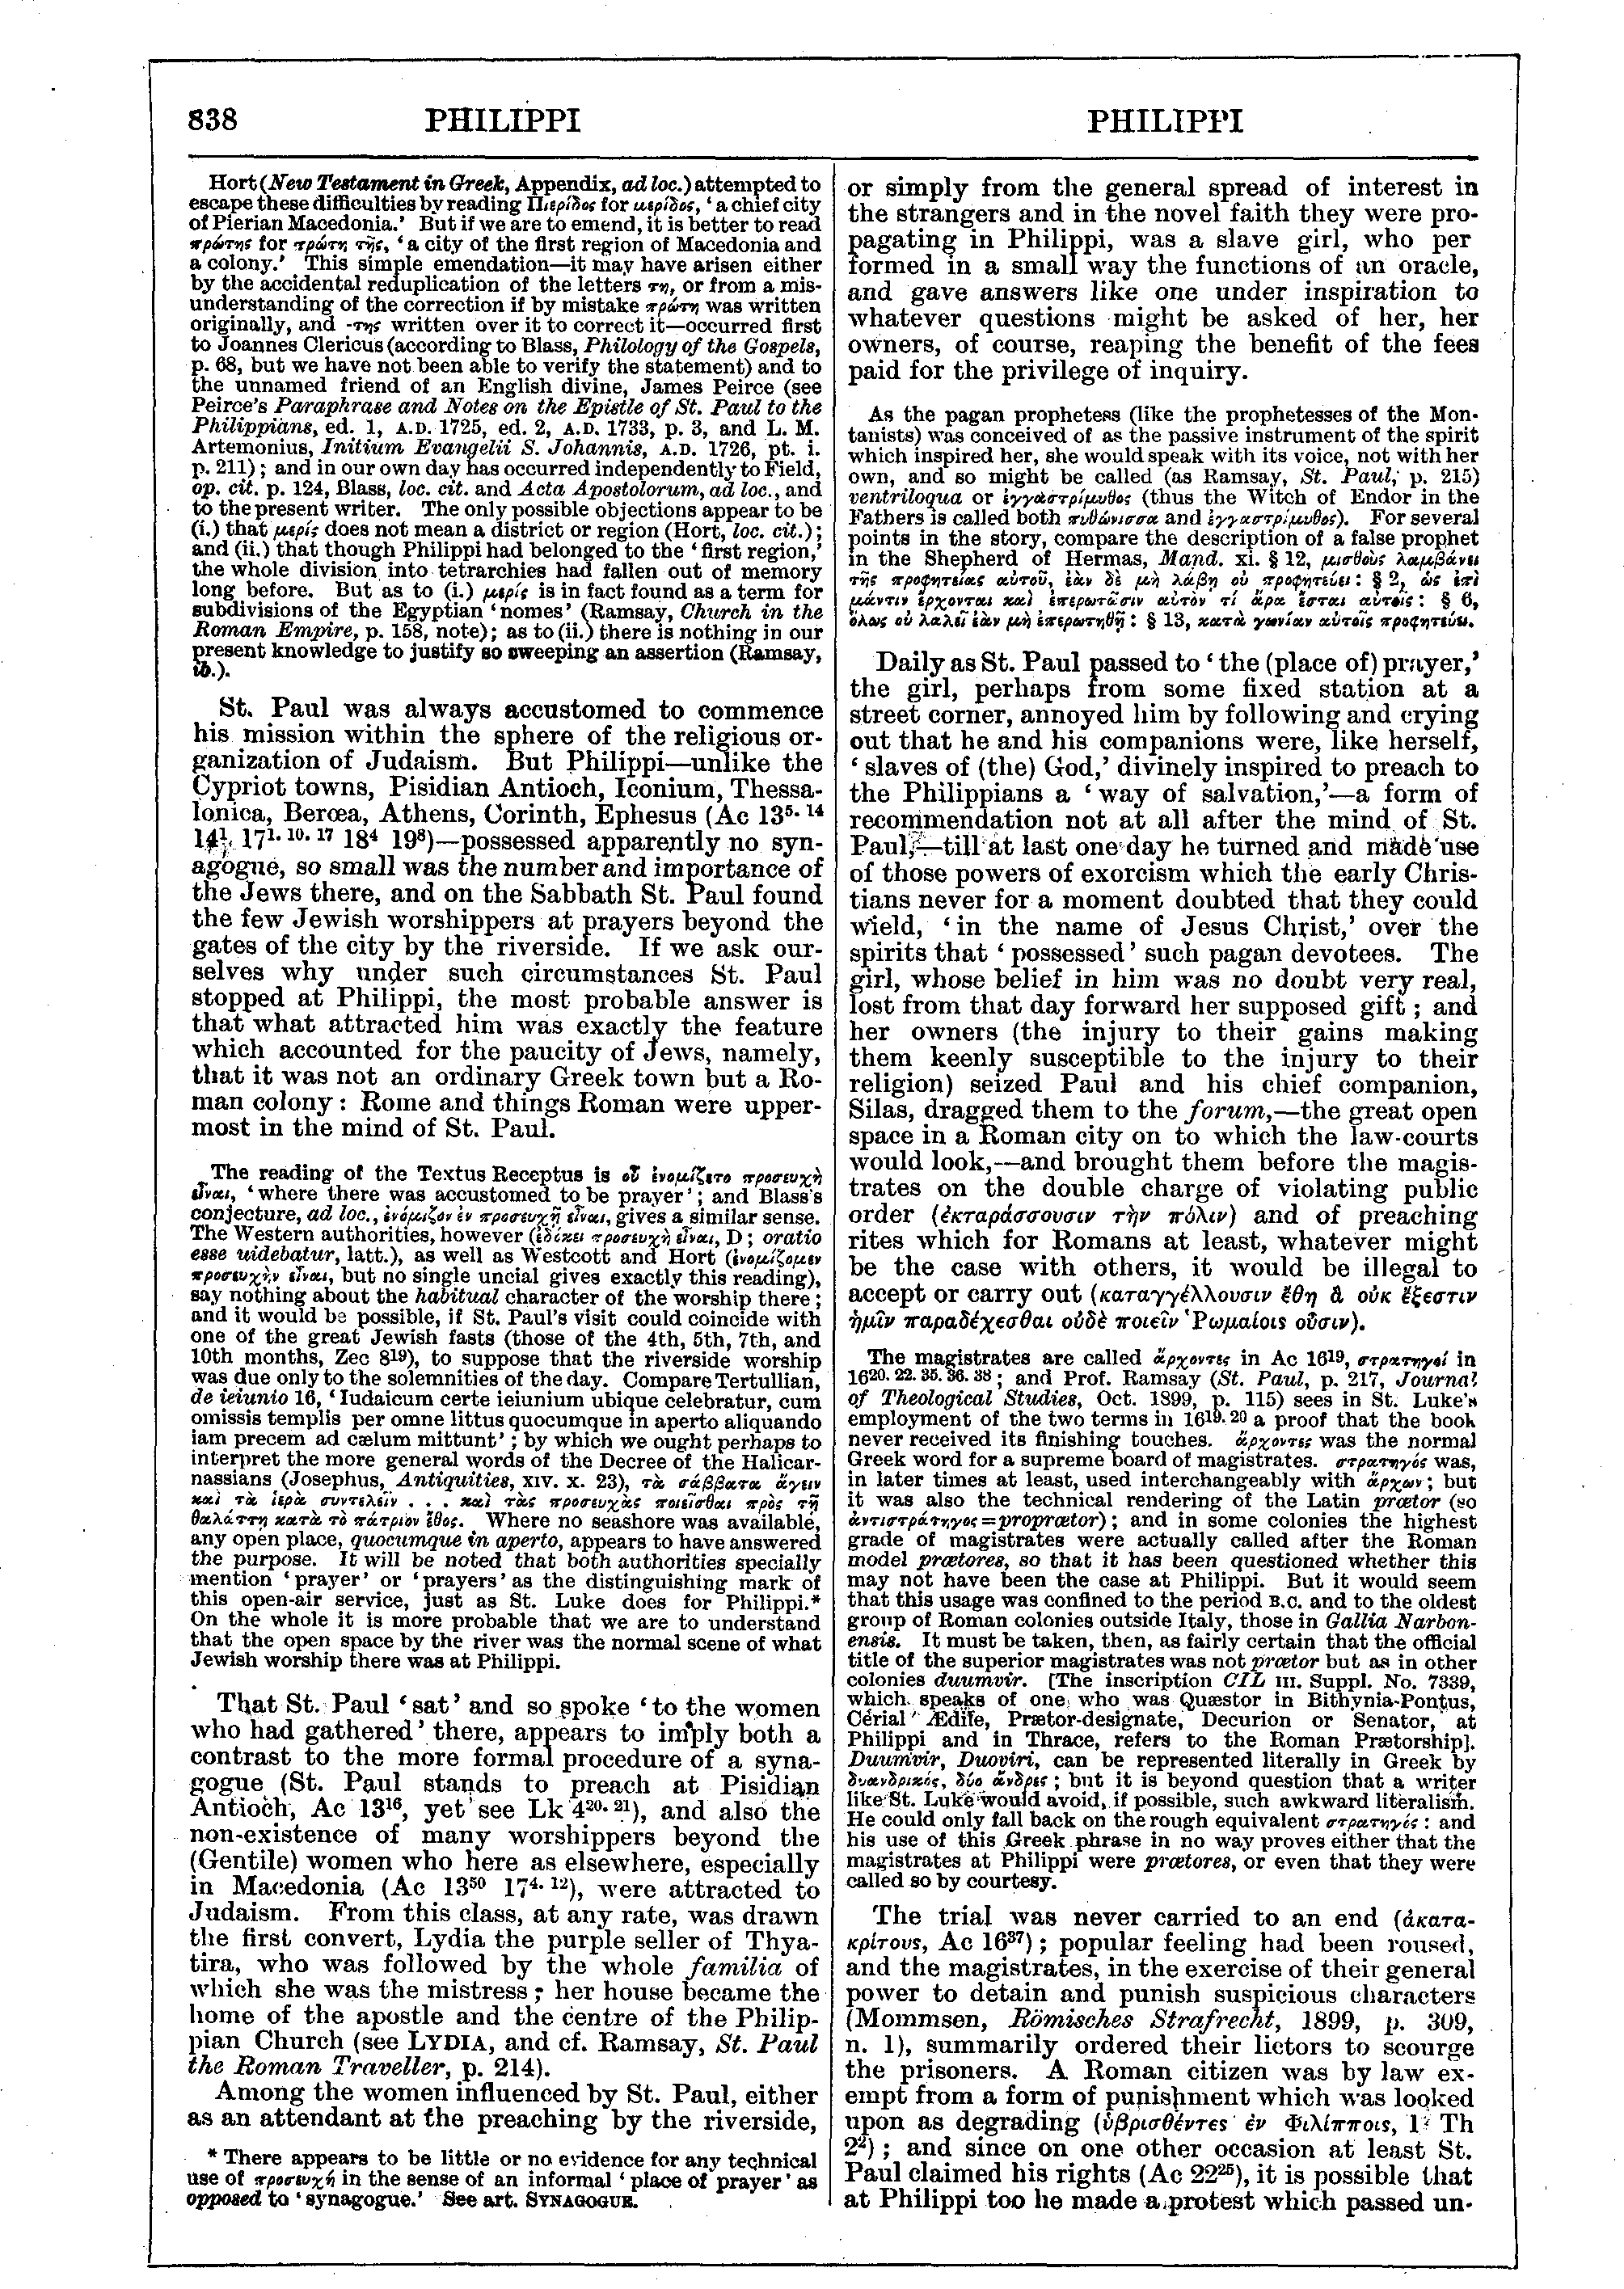 Image of page 838